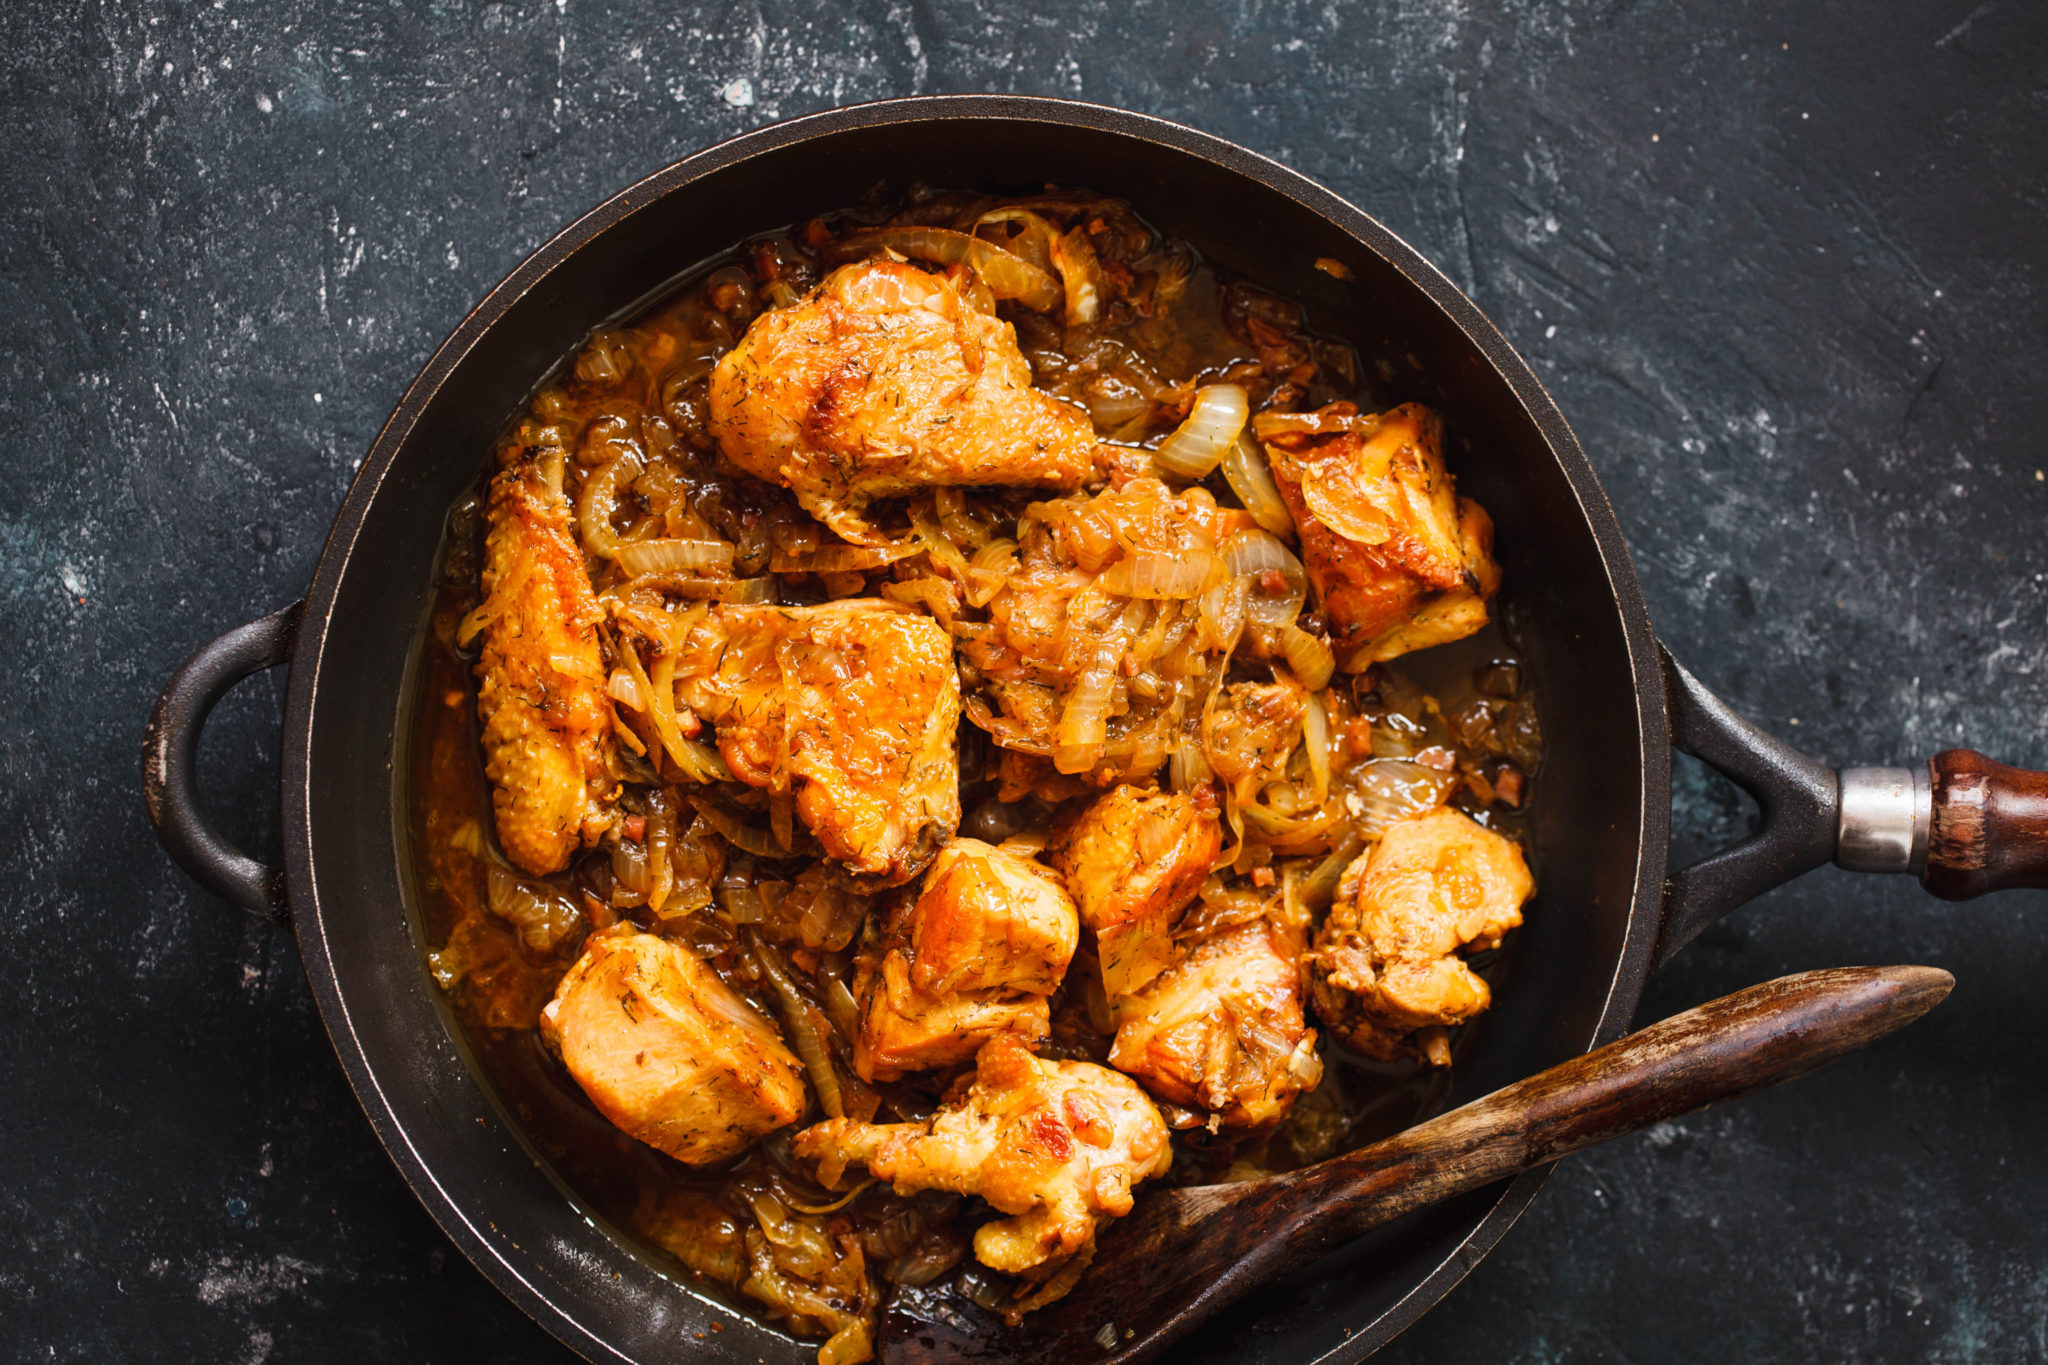  Chicken with caramelized onions